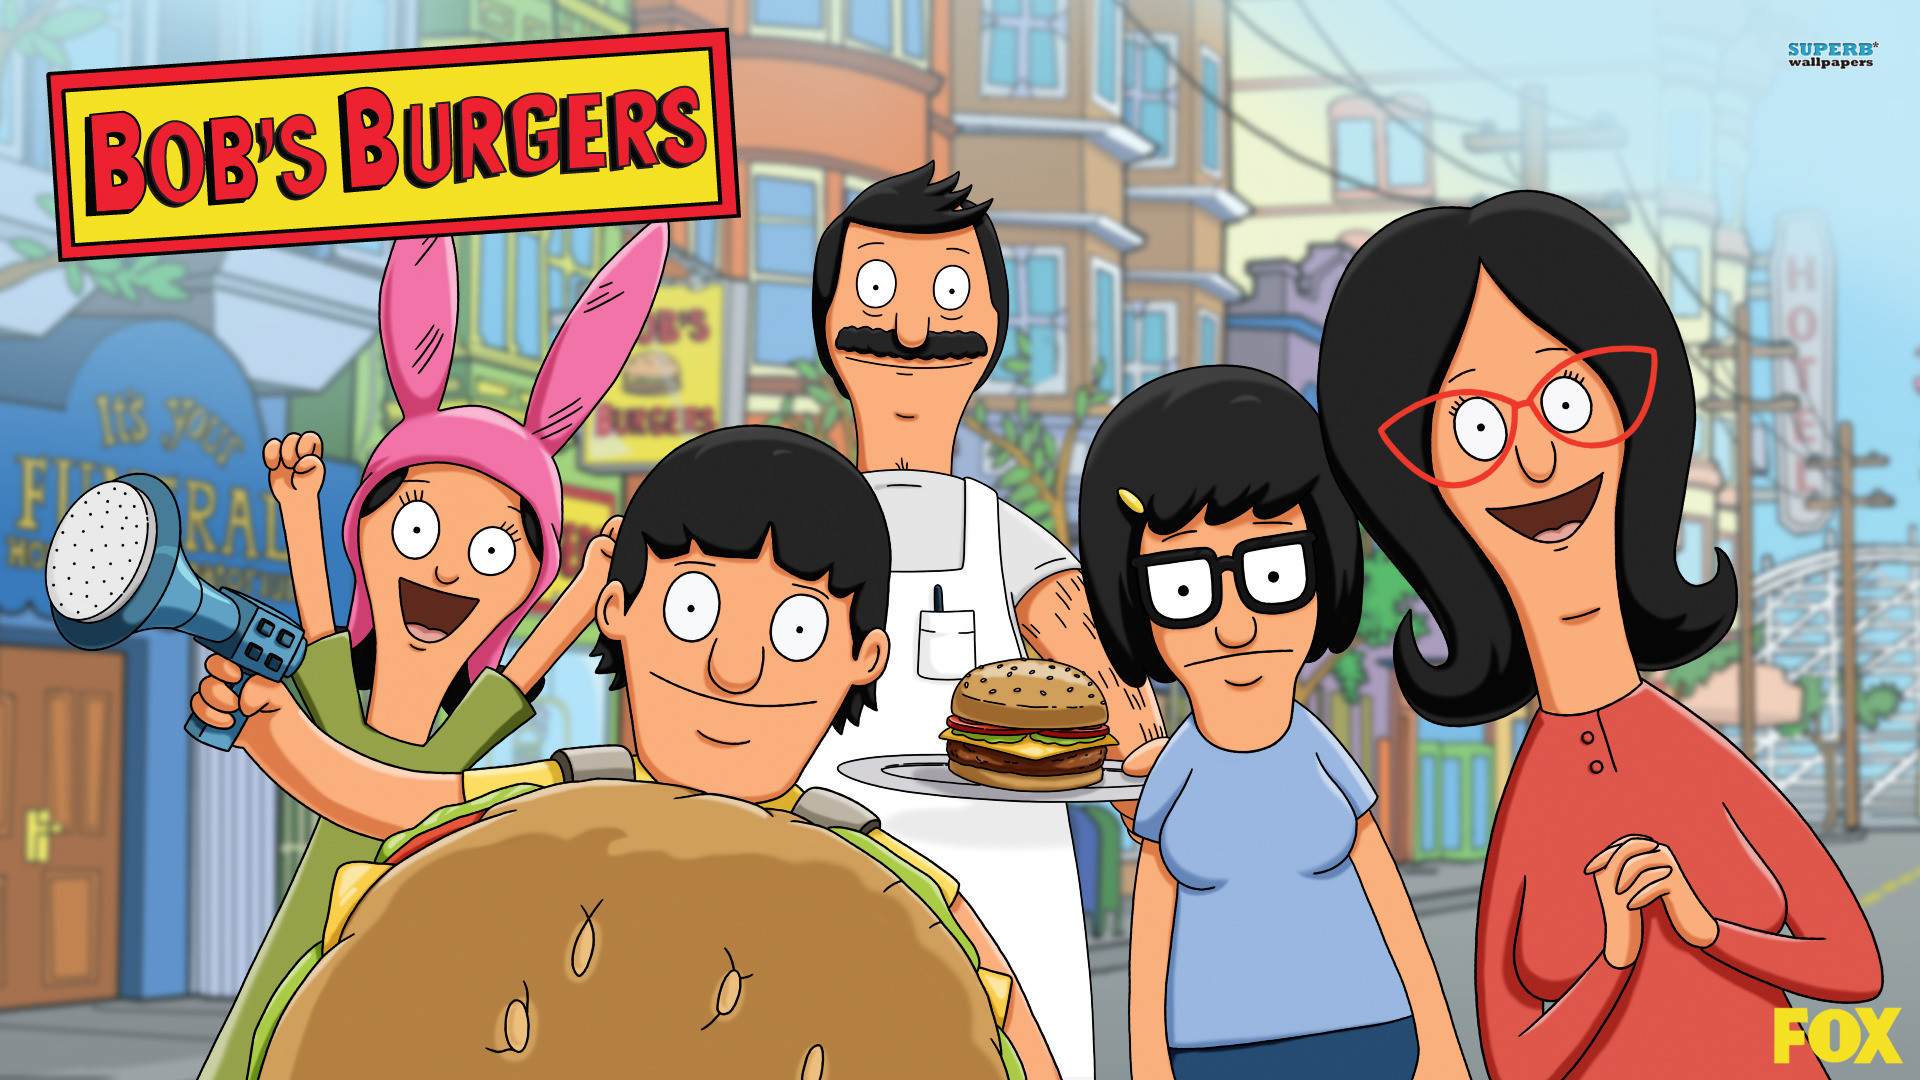 Bobs burgers backgrounds – Google Search